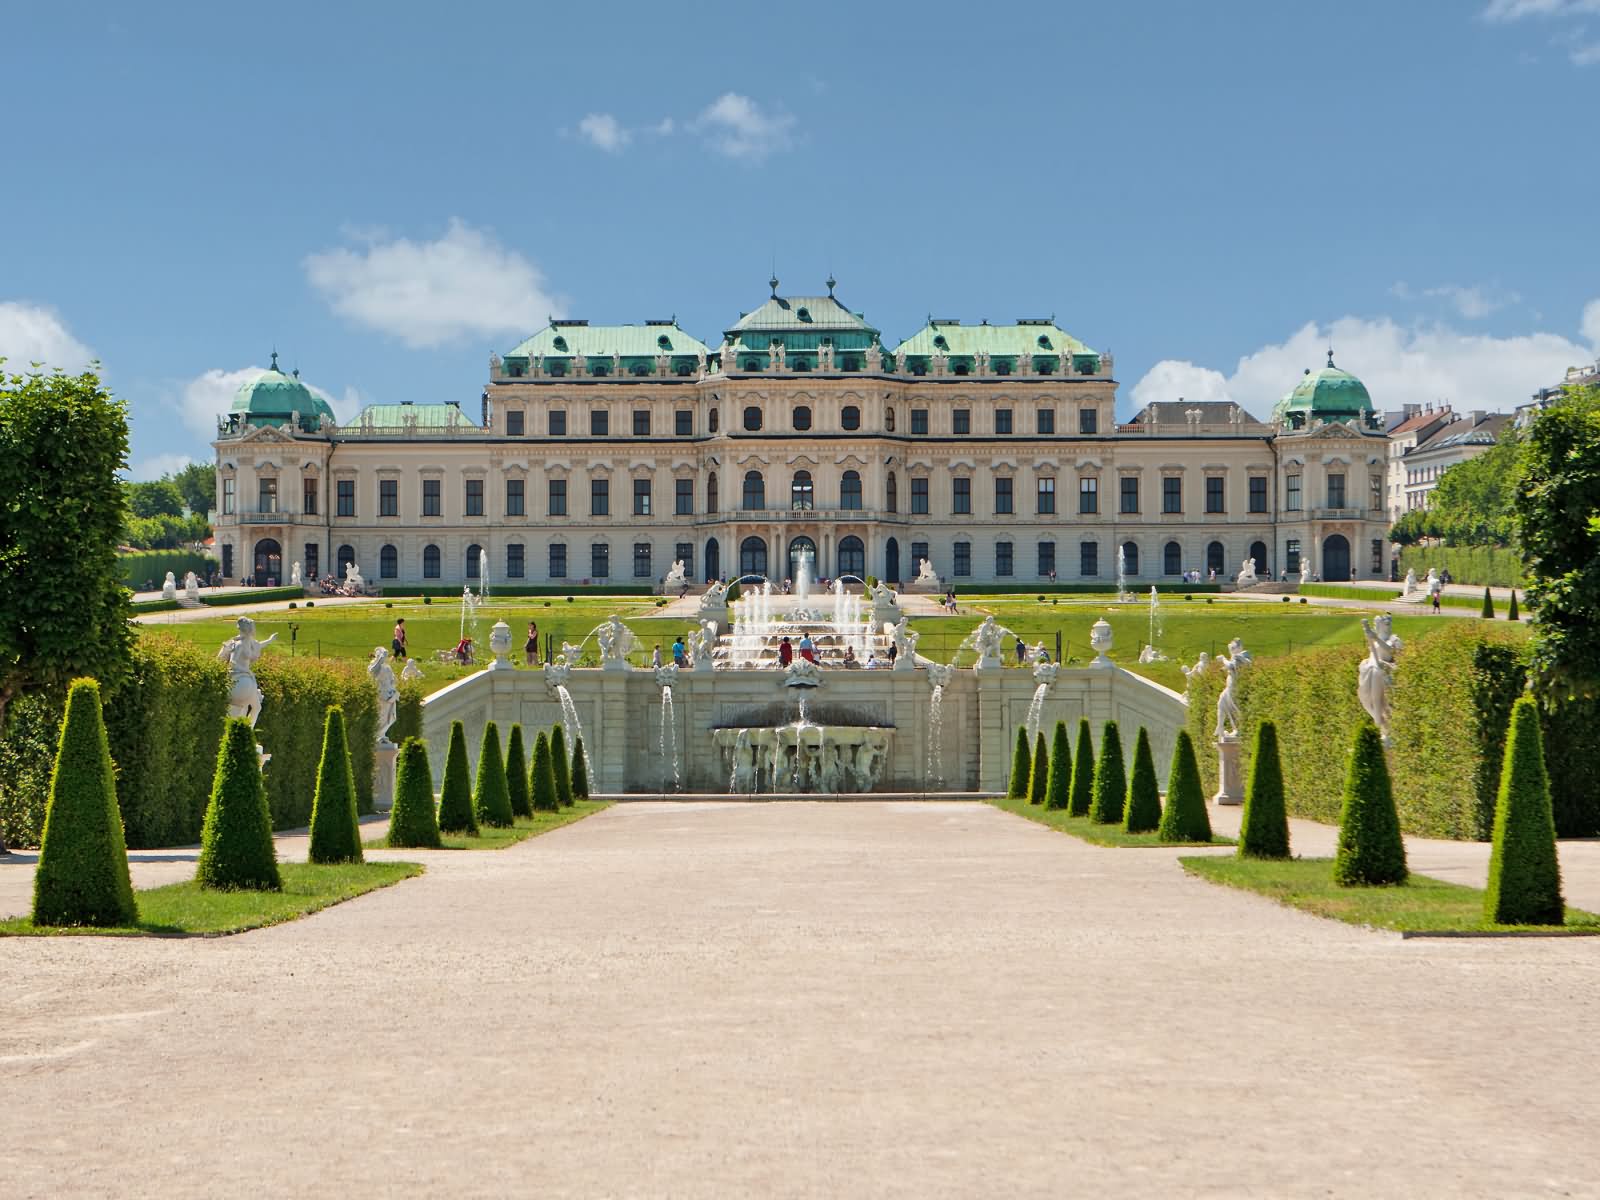 Front View Of The Schonbrunn Palace In Vienna, Austria